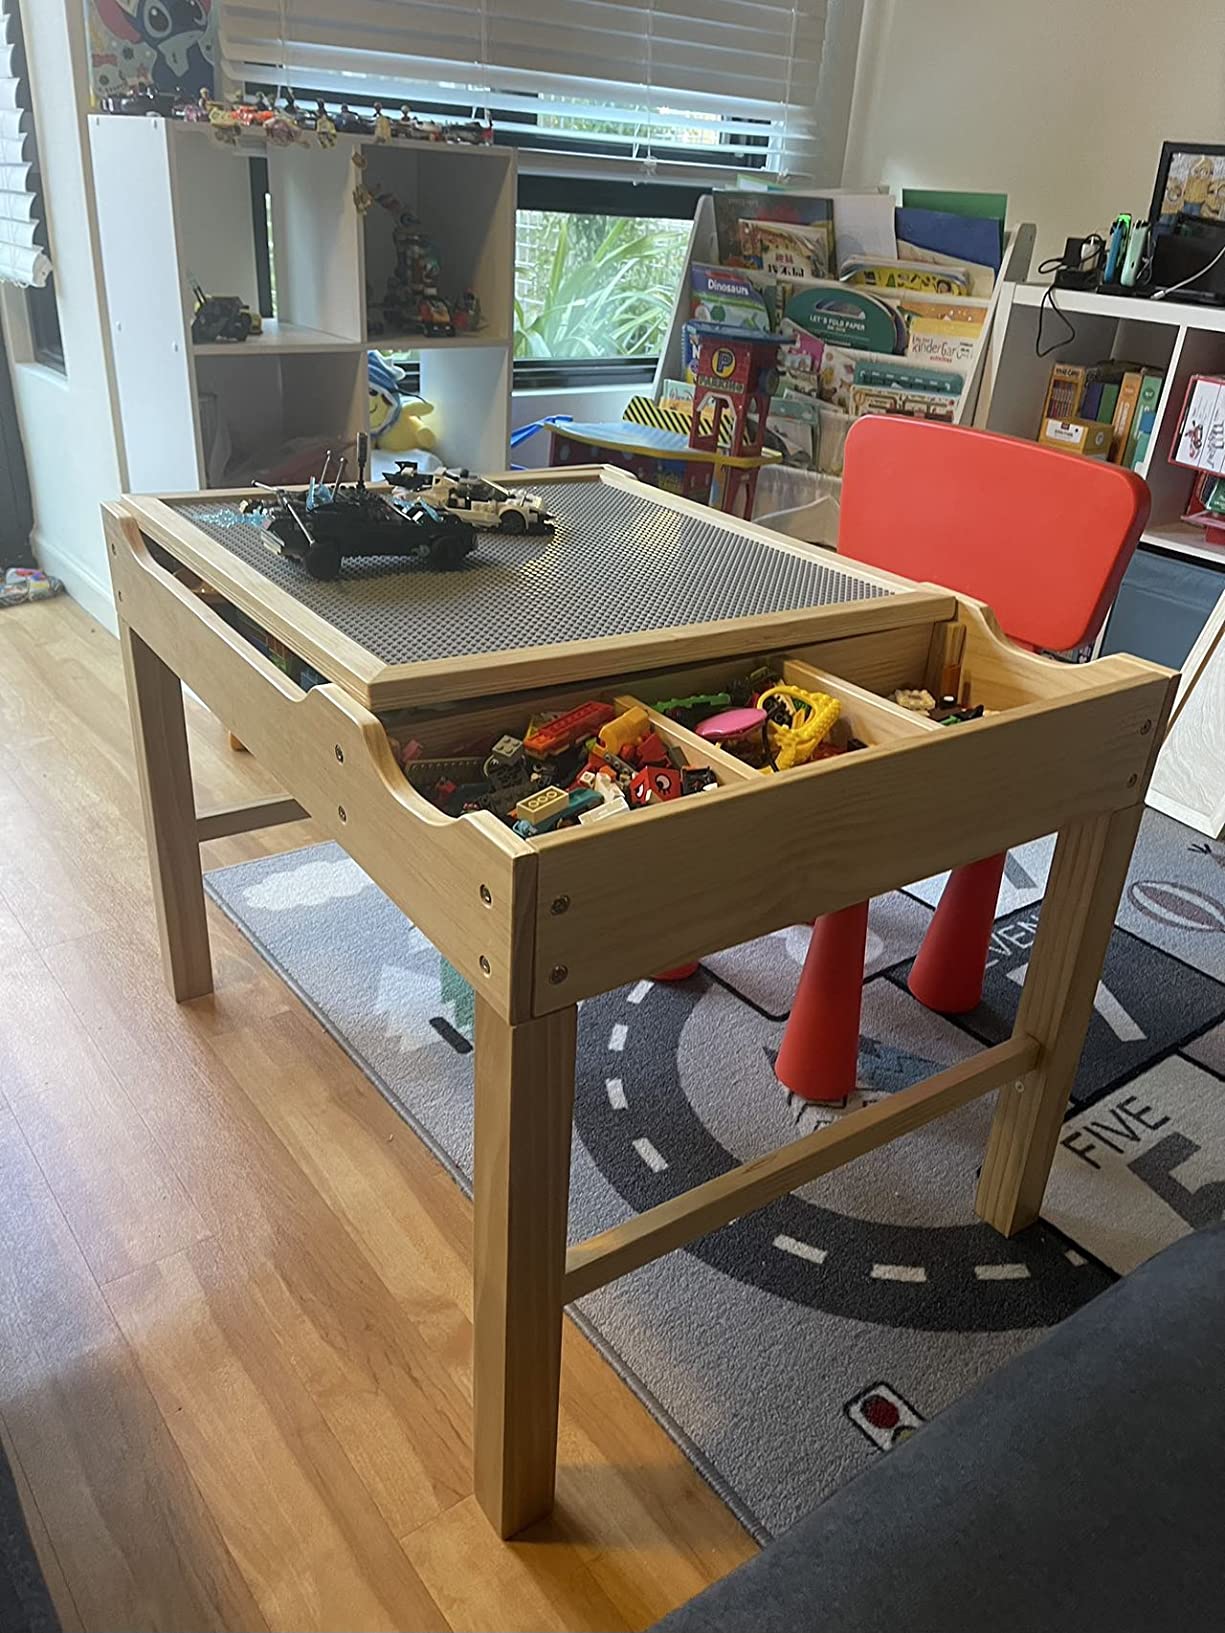 Great table for kids